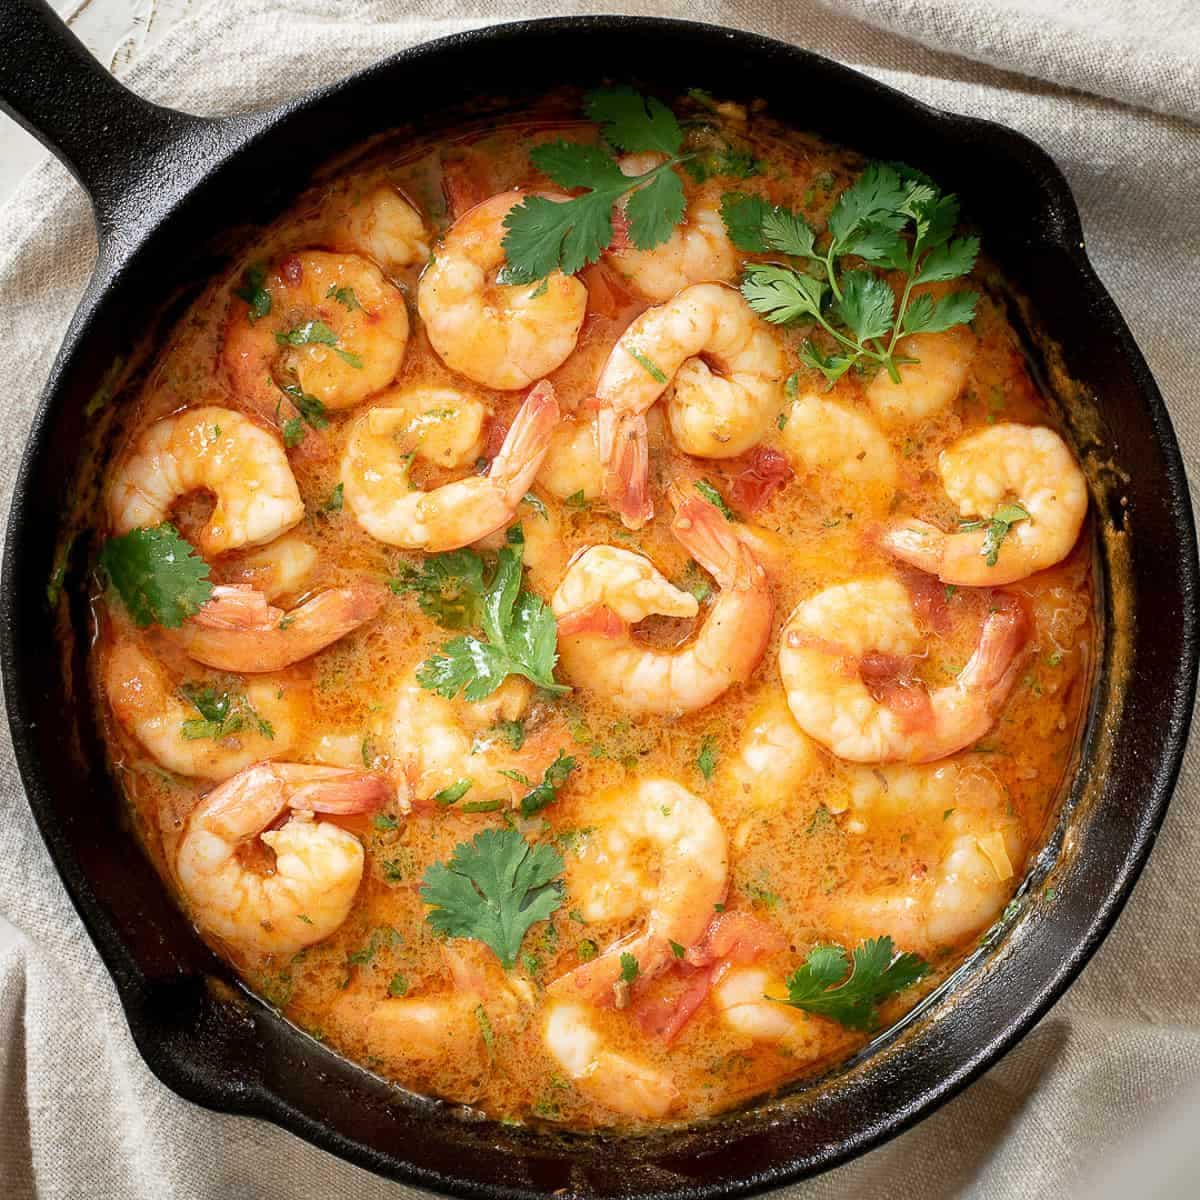 Juicy shrimp stir fry with buttery sofrito sauce in a black skillet.